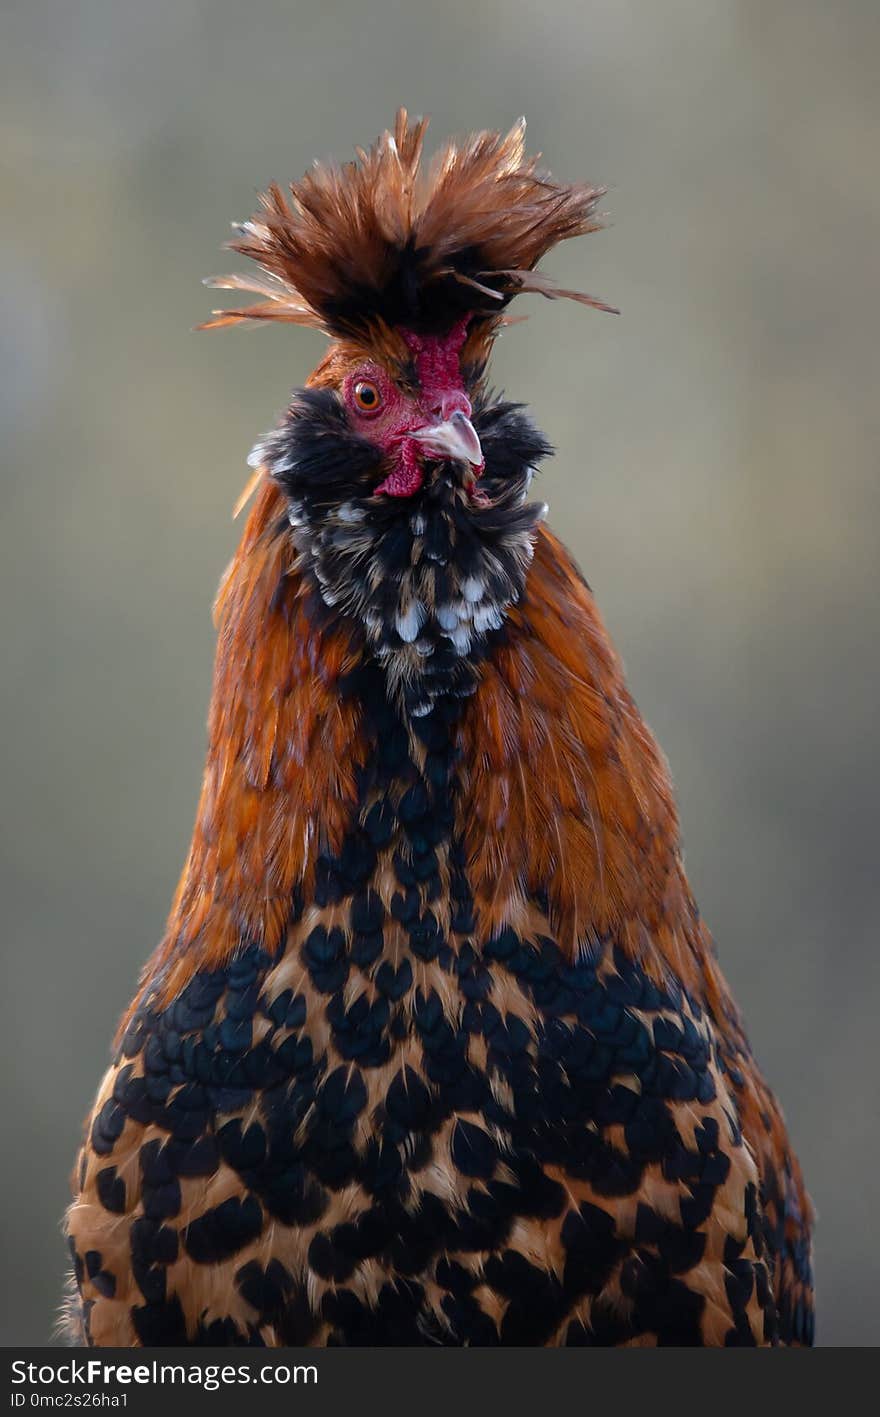 Funny portrait of a Pawlowskaja rooster - an old endangered russian brood